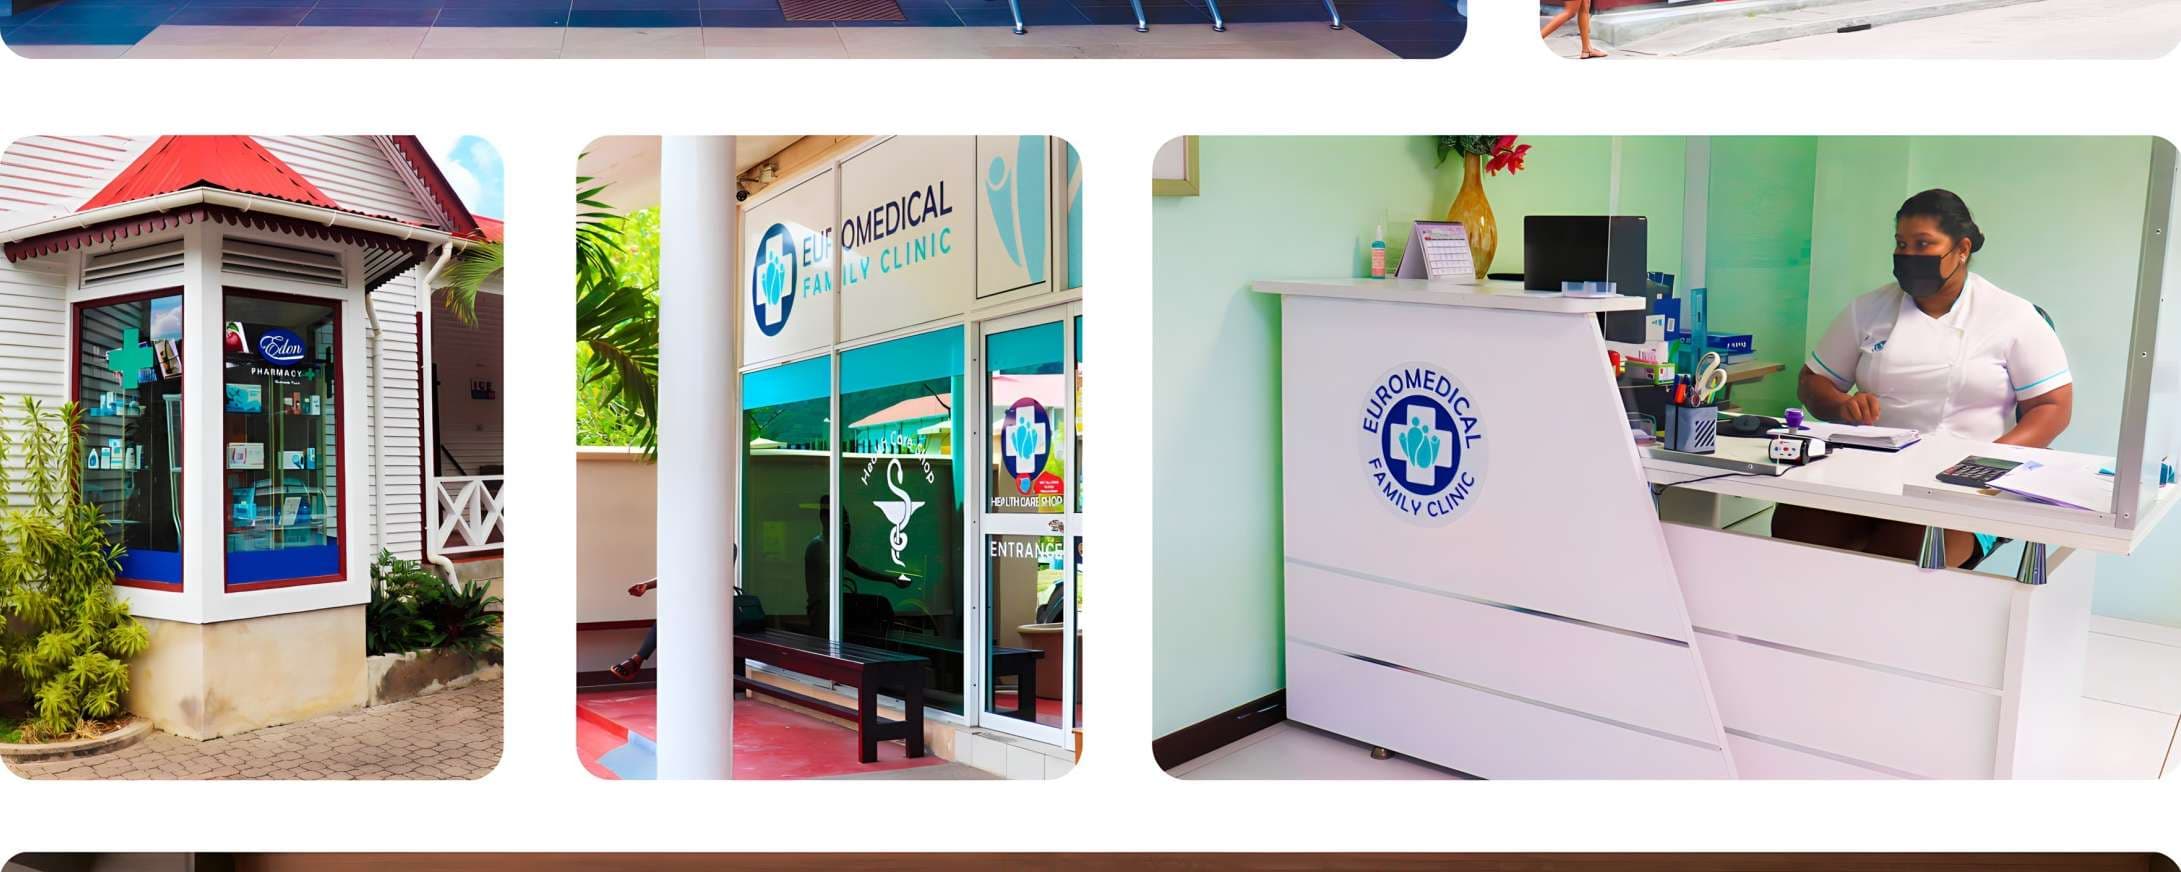 Euromedical Family Clinic